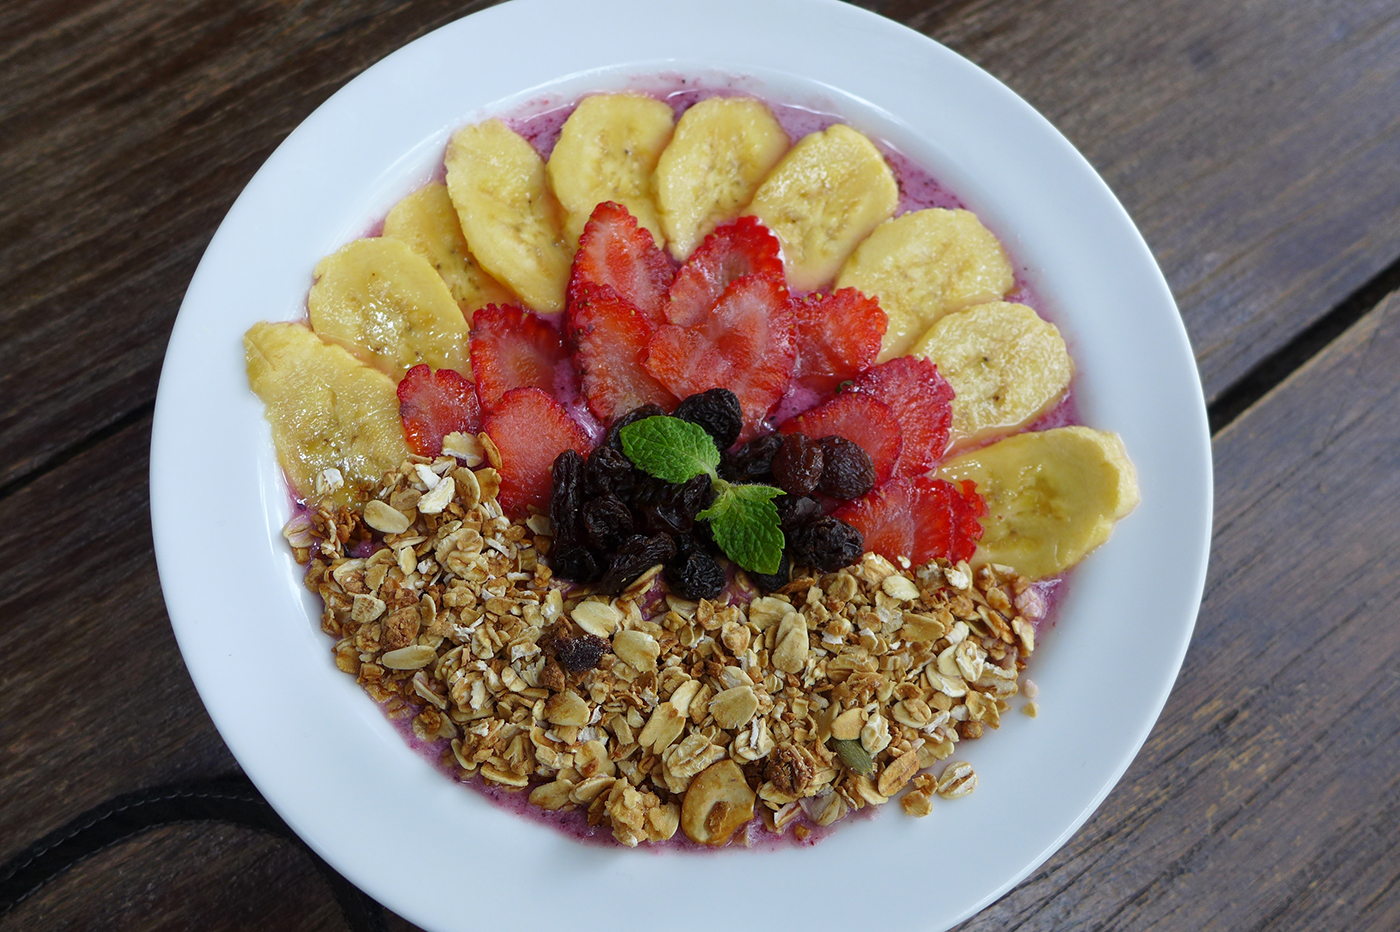 PRETTY AND NUTRITIOUS. The Mixed Berries Smoothie Bowl consists of granola, milk, bananas, raisins and strawberries
 